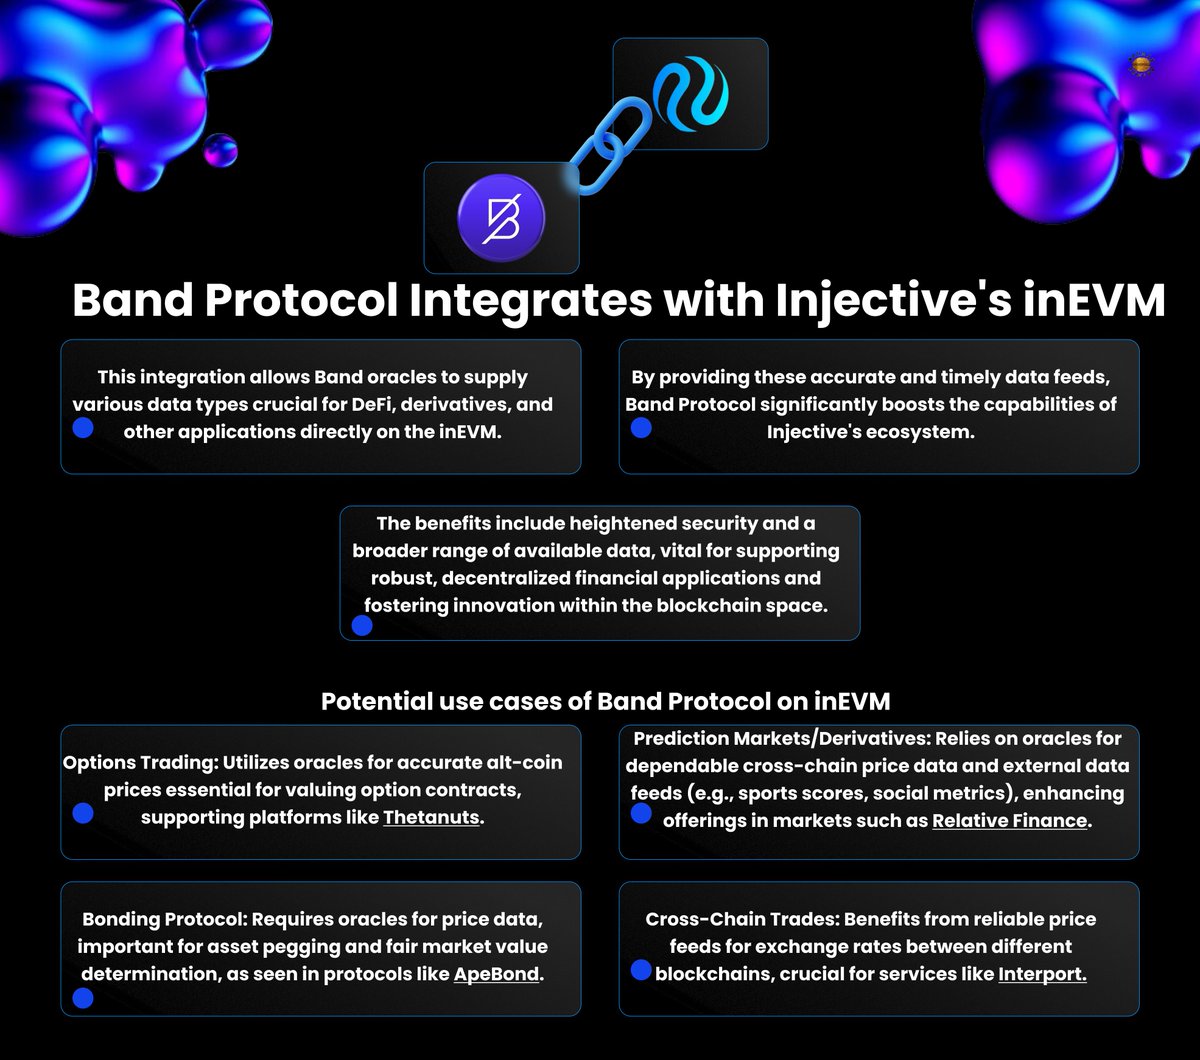 🥷@BandProtocol  and @injective  have collaborated to make Injective tech more accessible.

This integration will further improve interoperability and developer engagement.

More details: blog.bandprotocol.com/bandprotocol-i…